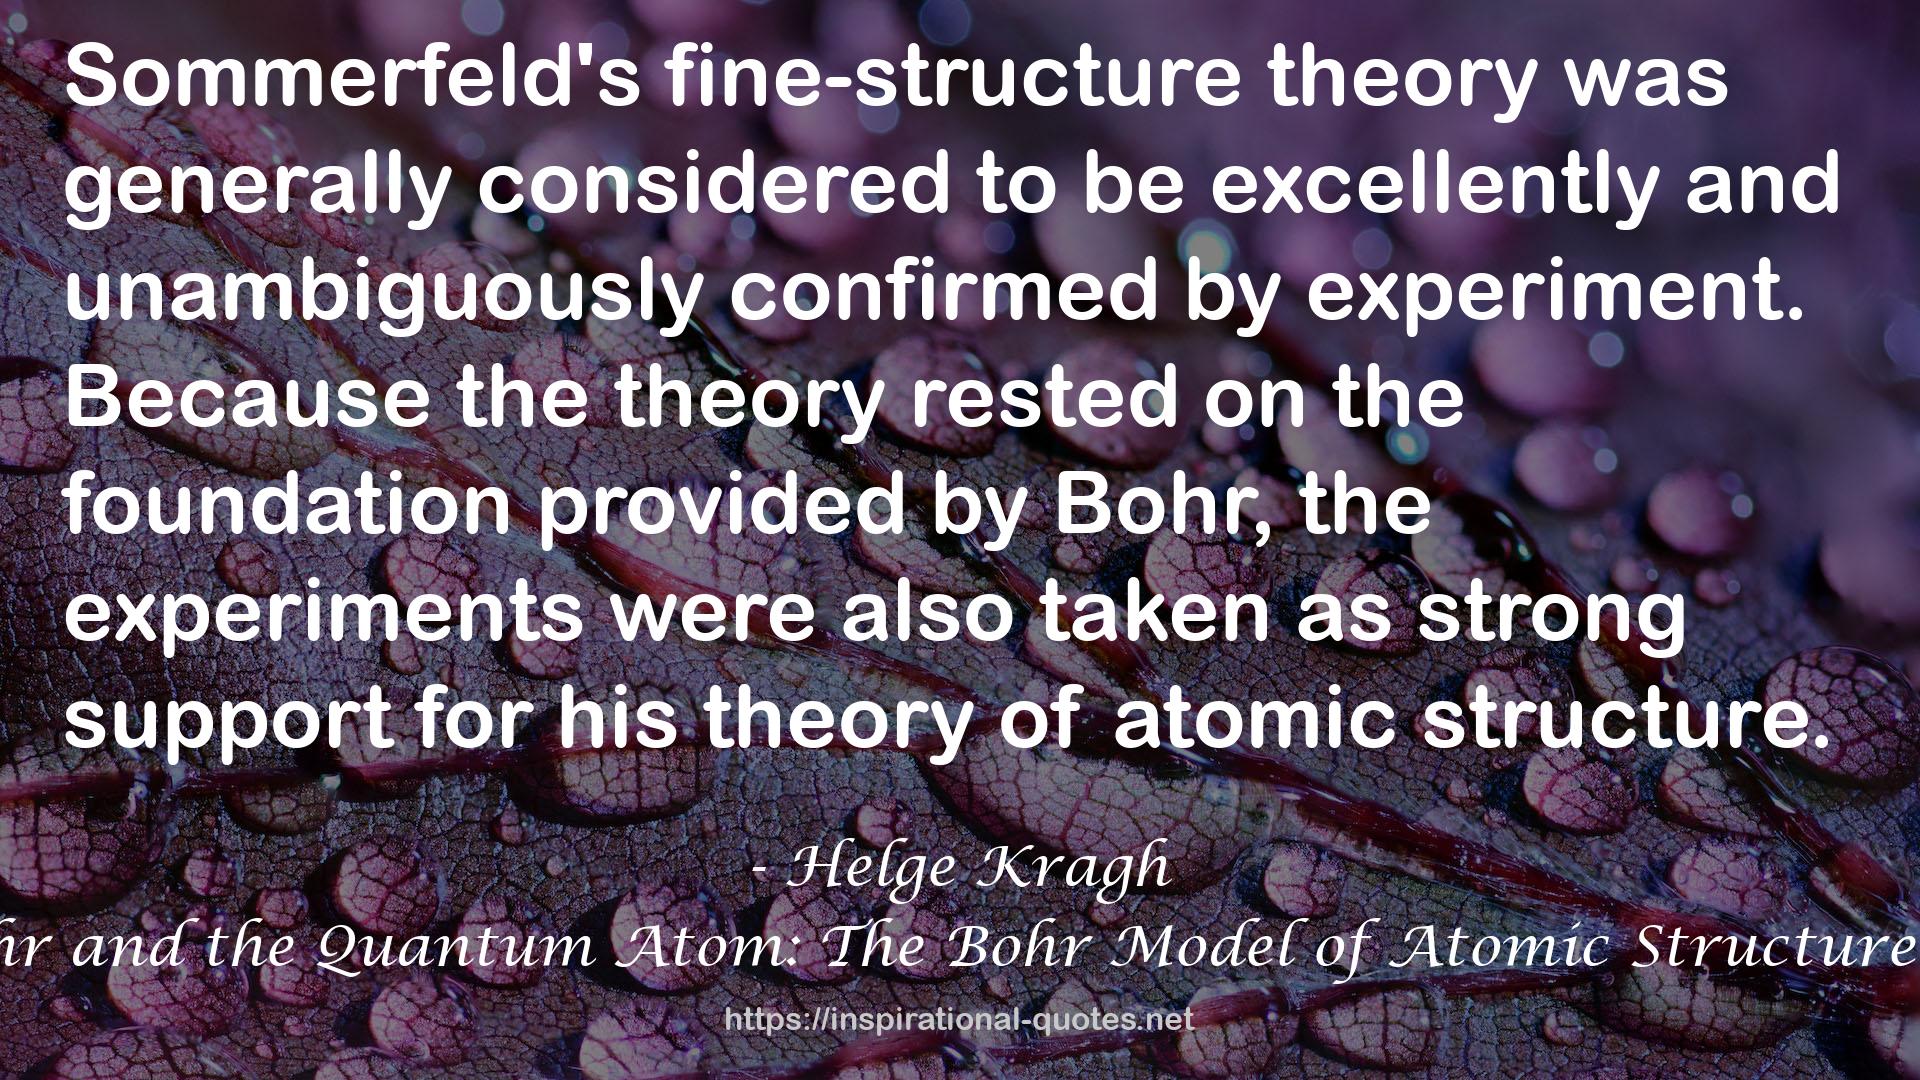 Niels Bohr and the Quantum Atom: The Bohr Model of Atomic Structure 1913-1925 QUOTES